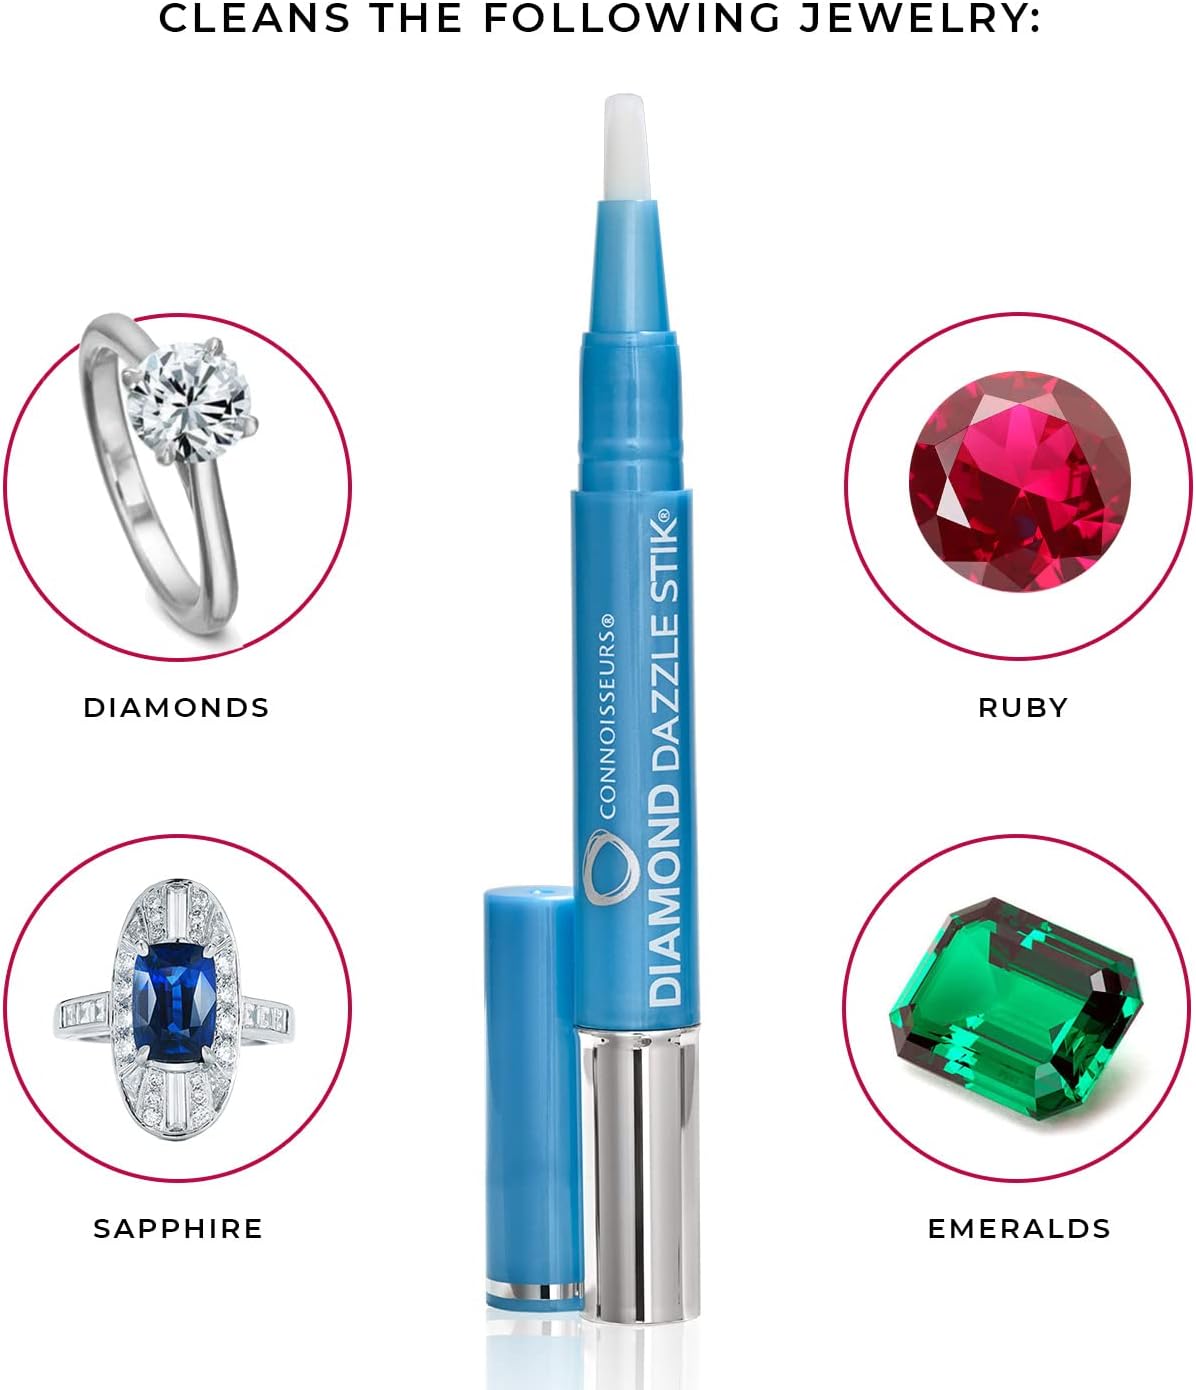 CONNOISSEURS Diamond Dazzle Stik - Portable Diamond Cleaner for Rings and Other Jewelry - Bring Out The Sparkle in Your Diamonds and Precious Stones Dazzle Stik (3 pack) - image 5 of 7